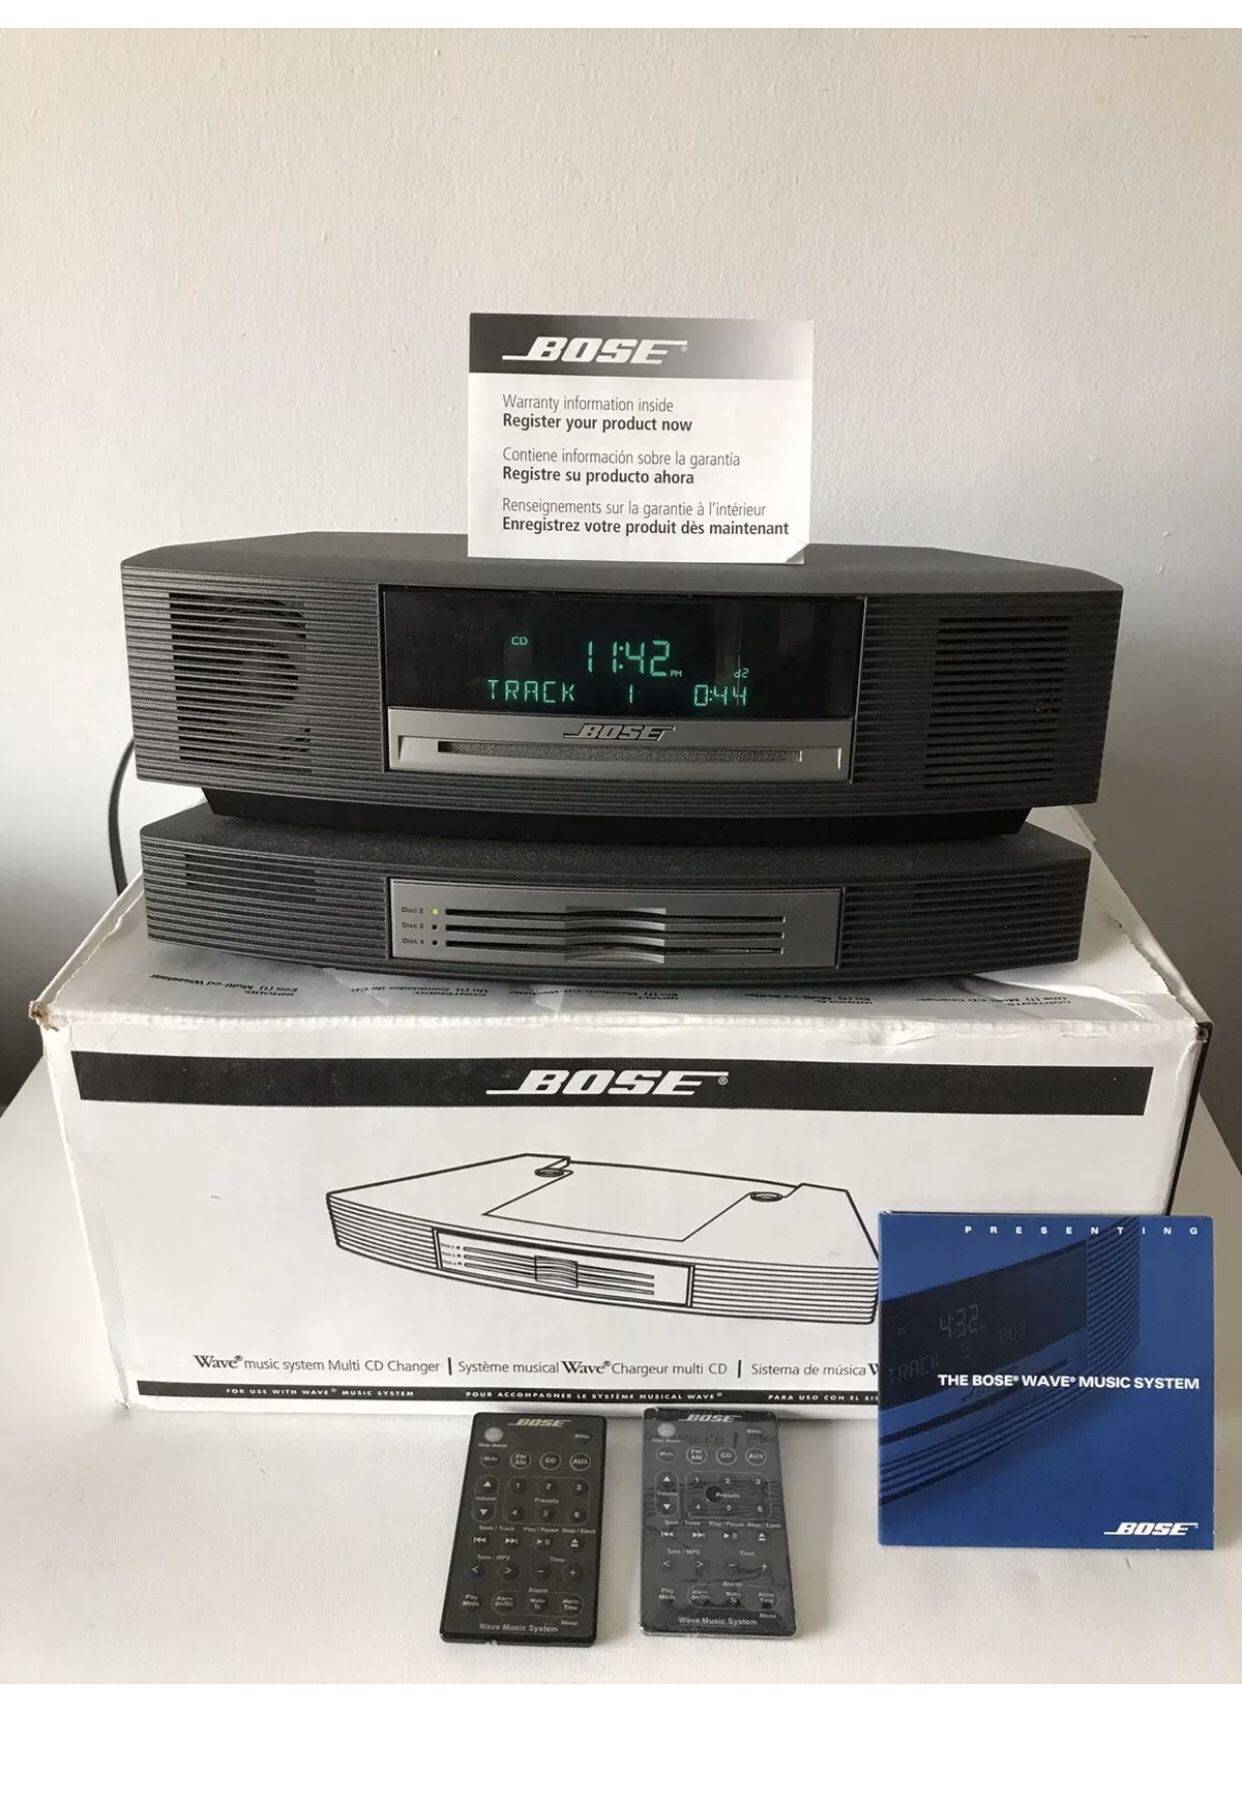 BOSE WAVE MUSIC SYSTEM MULTI CD CHANGER 3 DISC + 2 REMOTES- EXCELLENT CONDITION